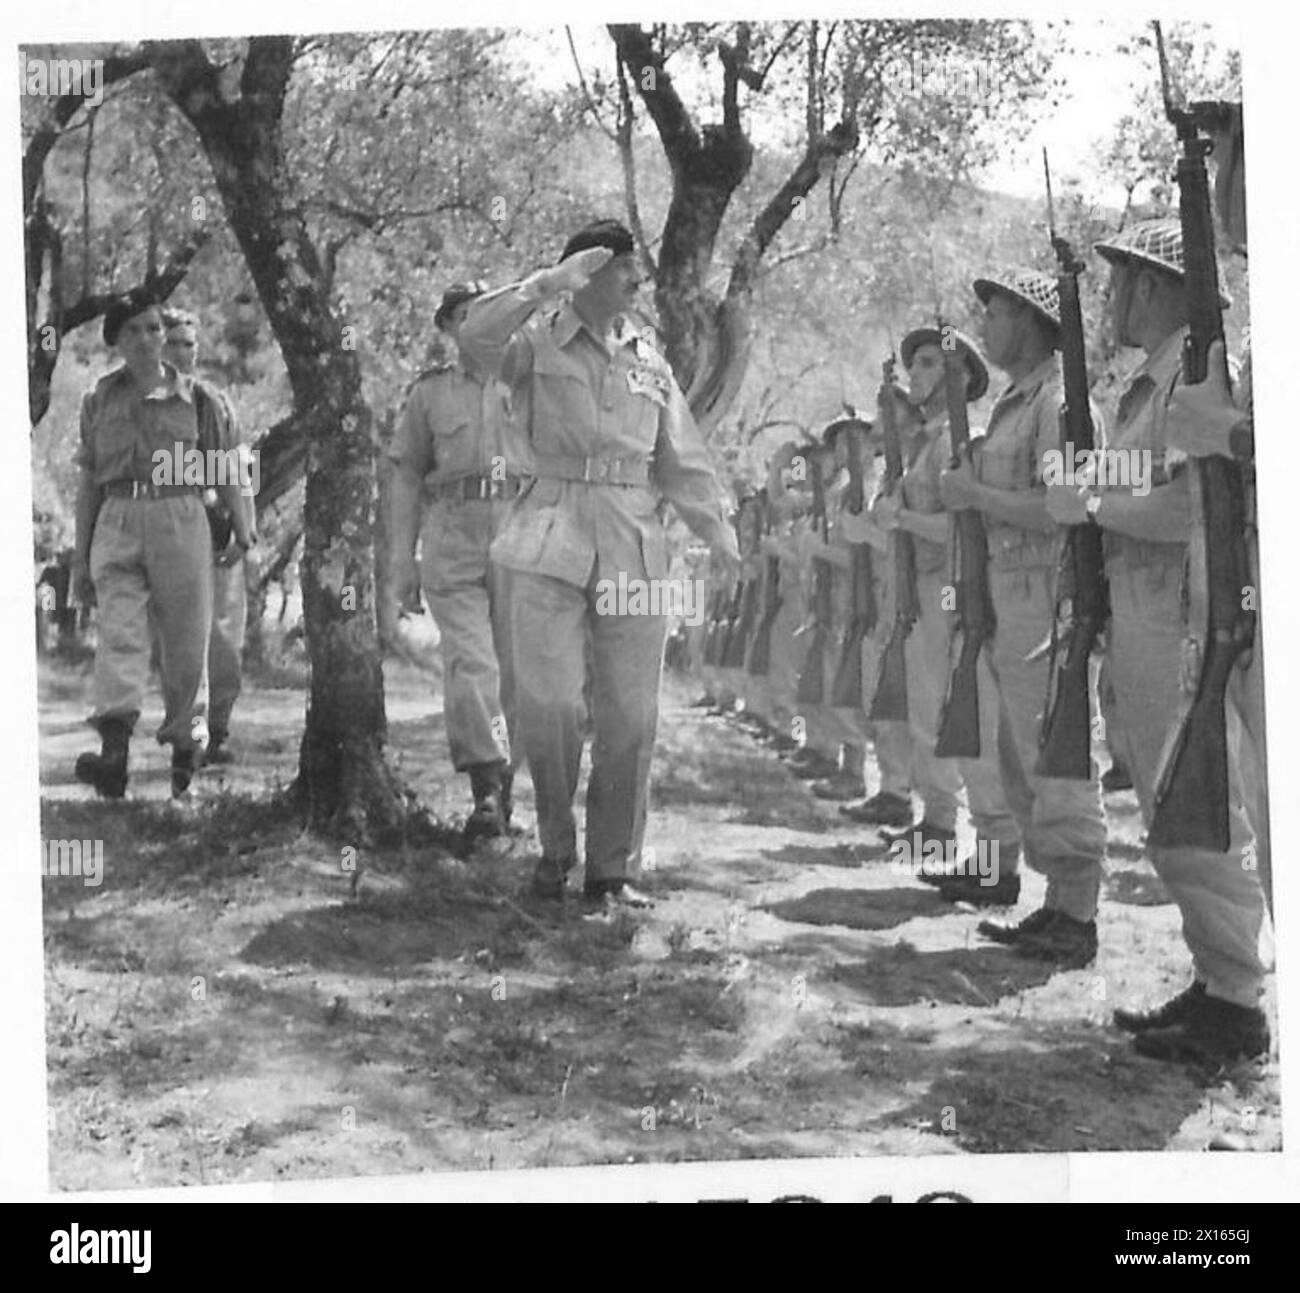 THE POLISH ARMY IN THE ITALIAN CAMPAIGN, 1943-1945 - General Władysław Anders, the Commander of the 2nd Polish Corps, saluting Guard of Honour at his arrival at his HQ at Cervaro, 24 May 1944.Photograph taken before General Harold Alexander decorated General Anders with the Companion of Order of the Bath for Polish services at Cassino British Army, Polish Army, Polish Armed Forces in the West, Polish Corps, II, 8th Army, Anders, Władysław Stock Photo